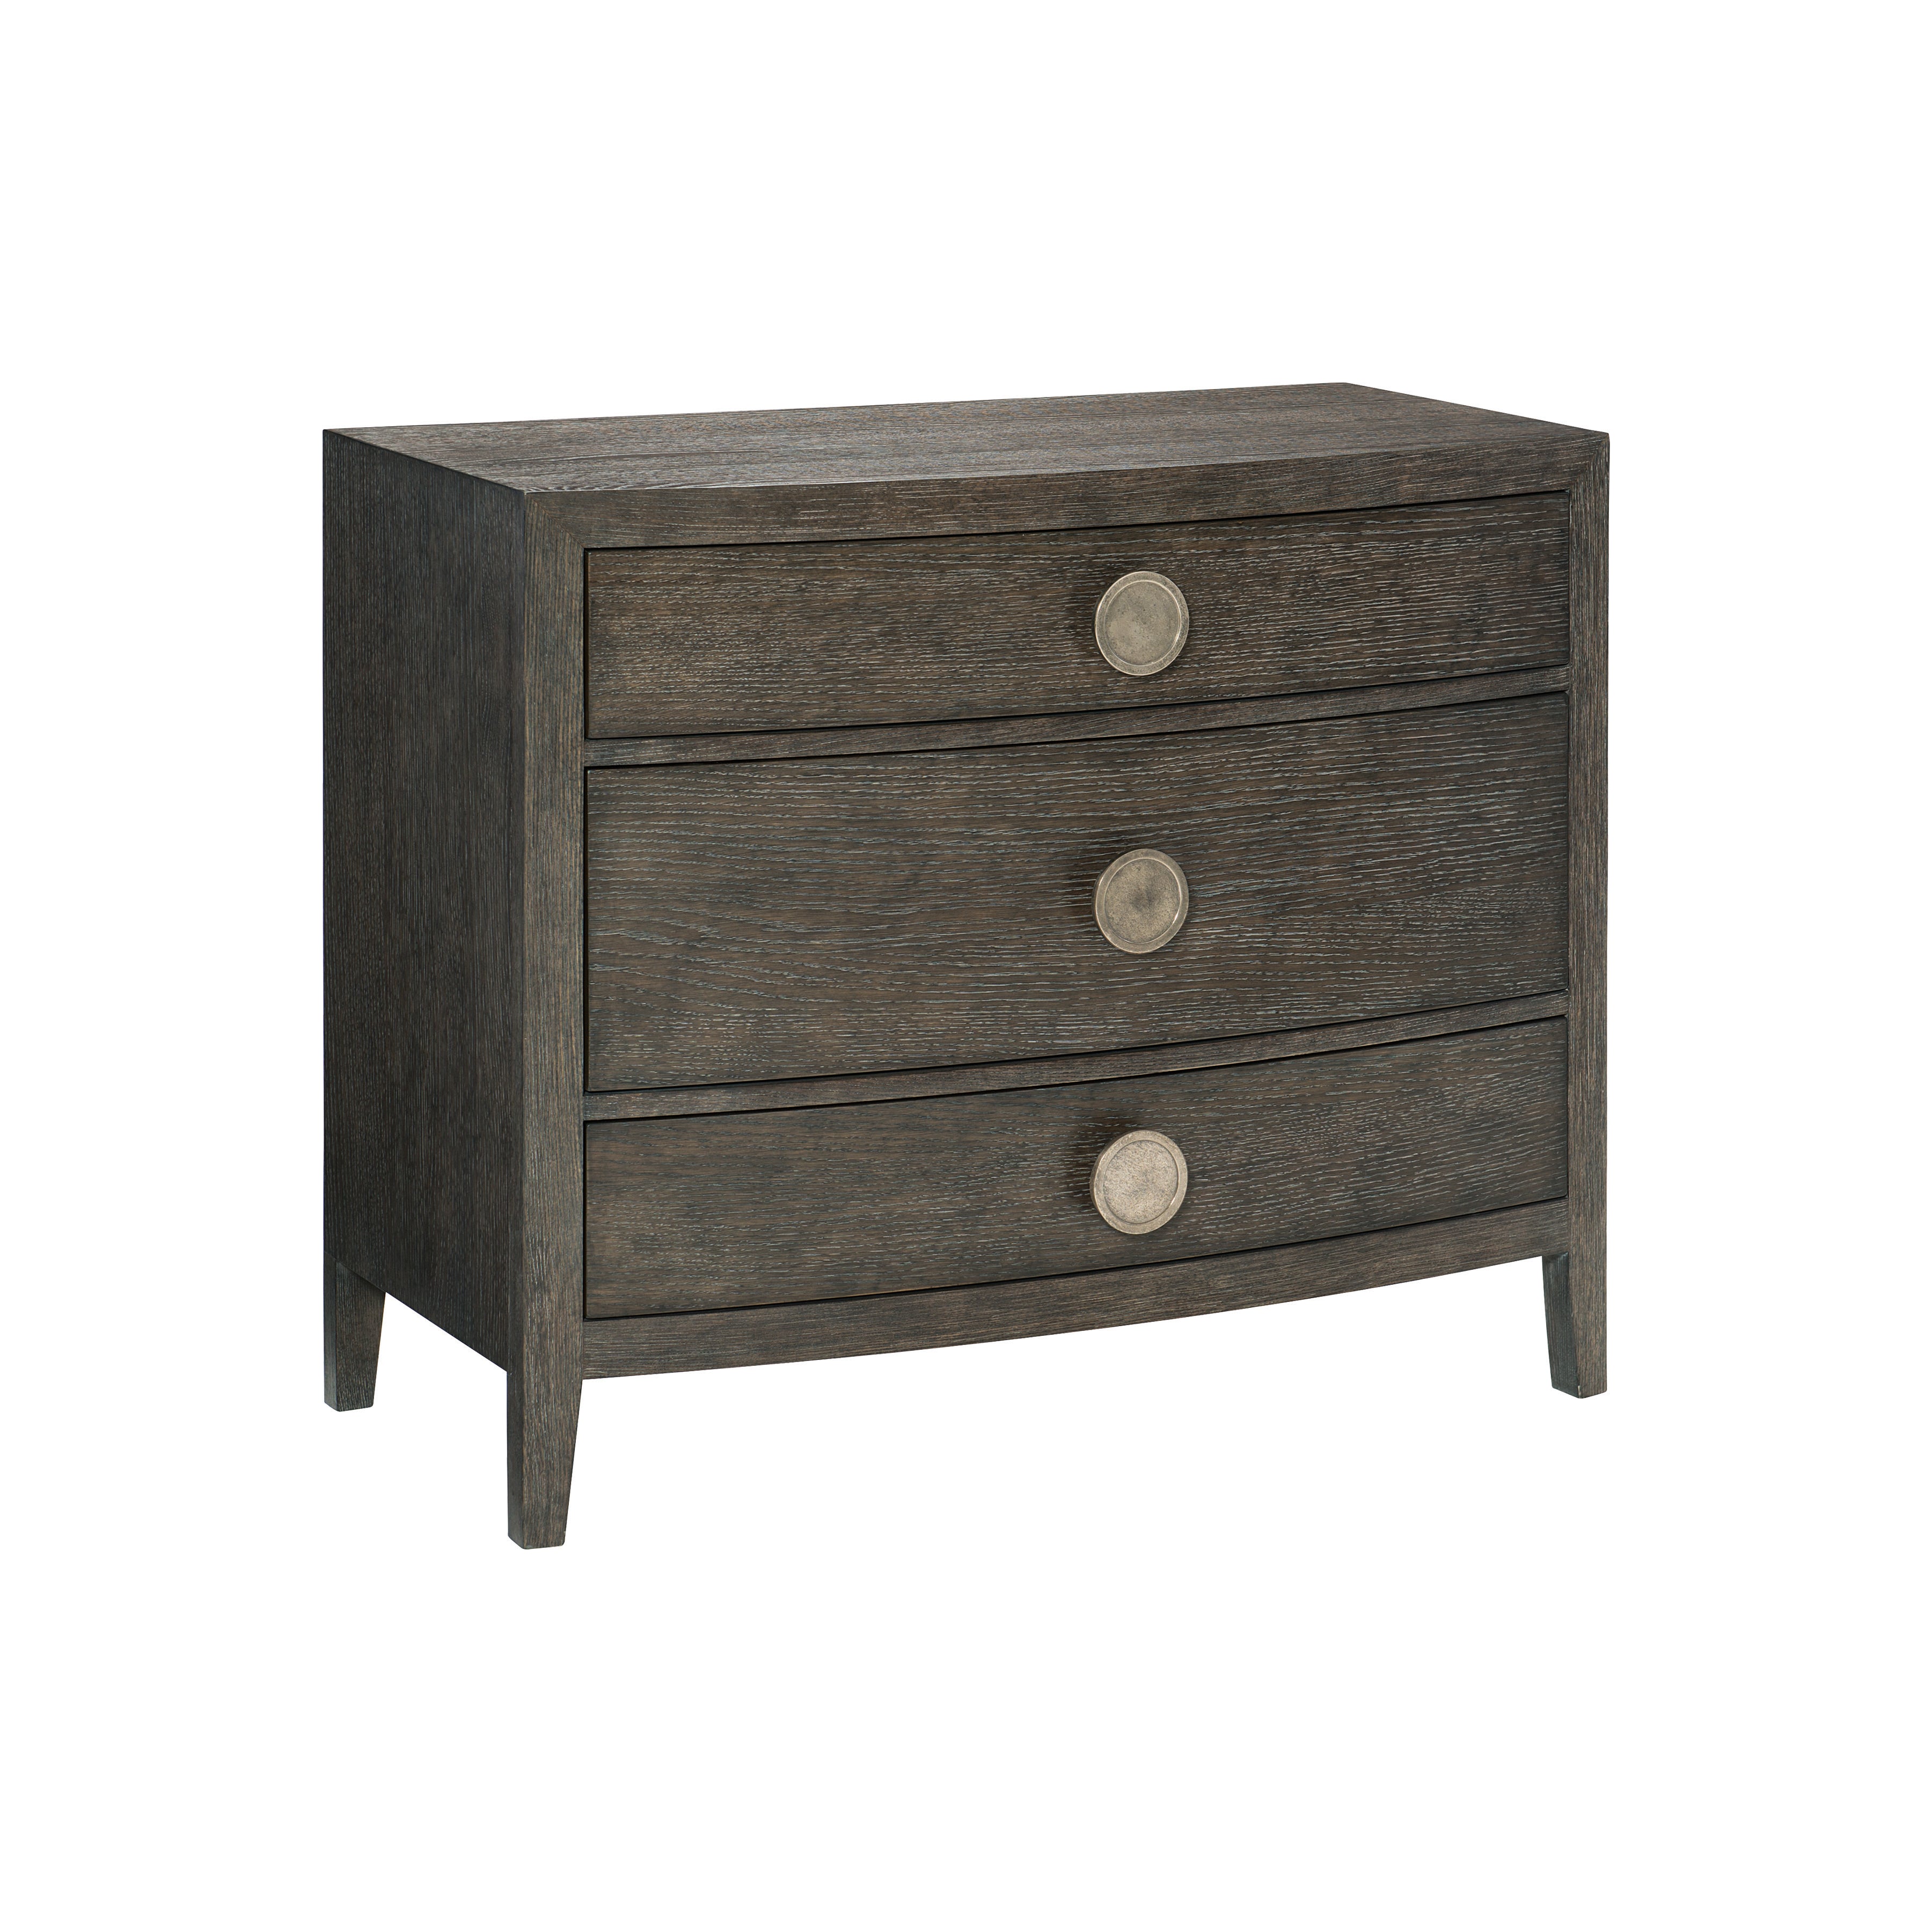 Linea Bachelor's Chest in Cerused Charcoal